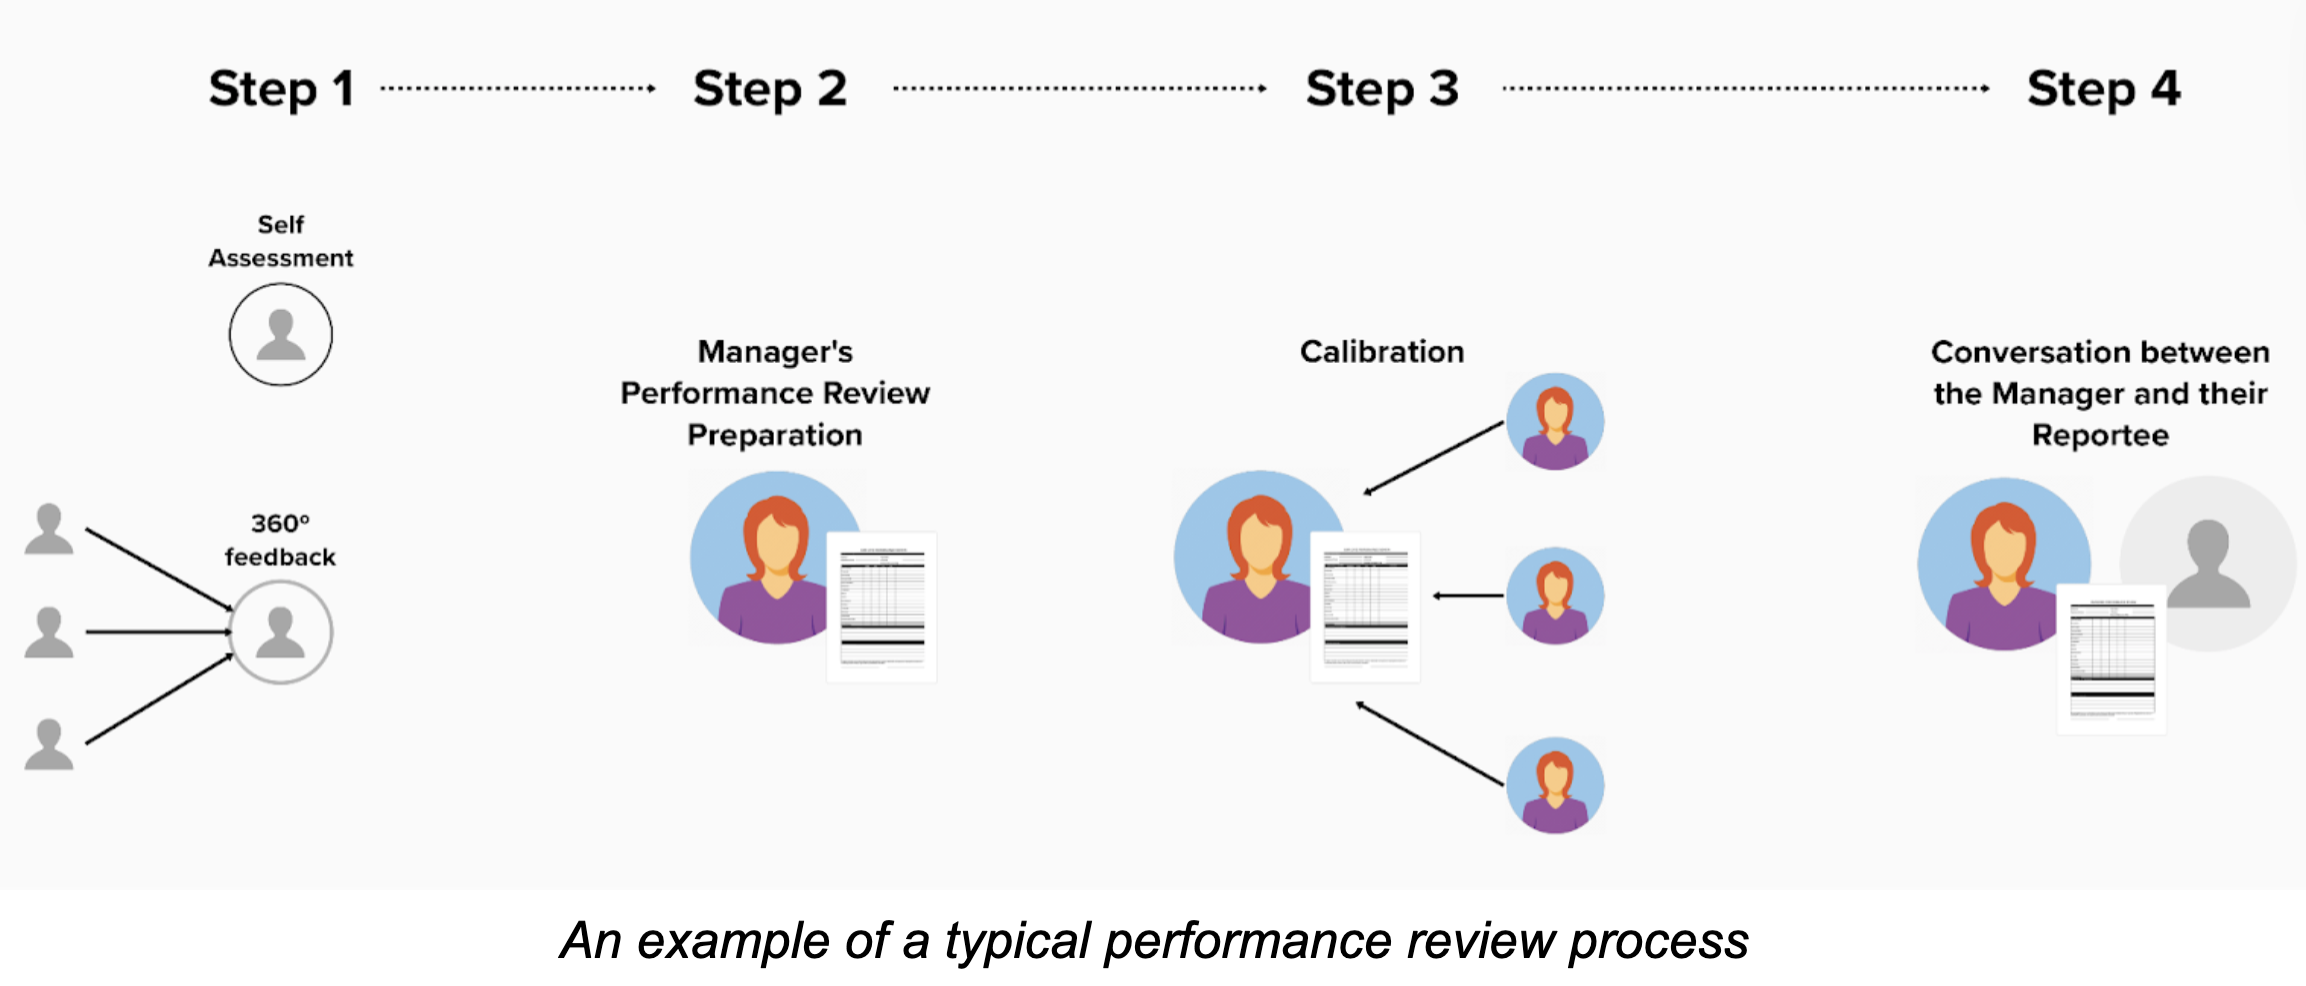 performance review process